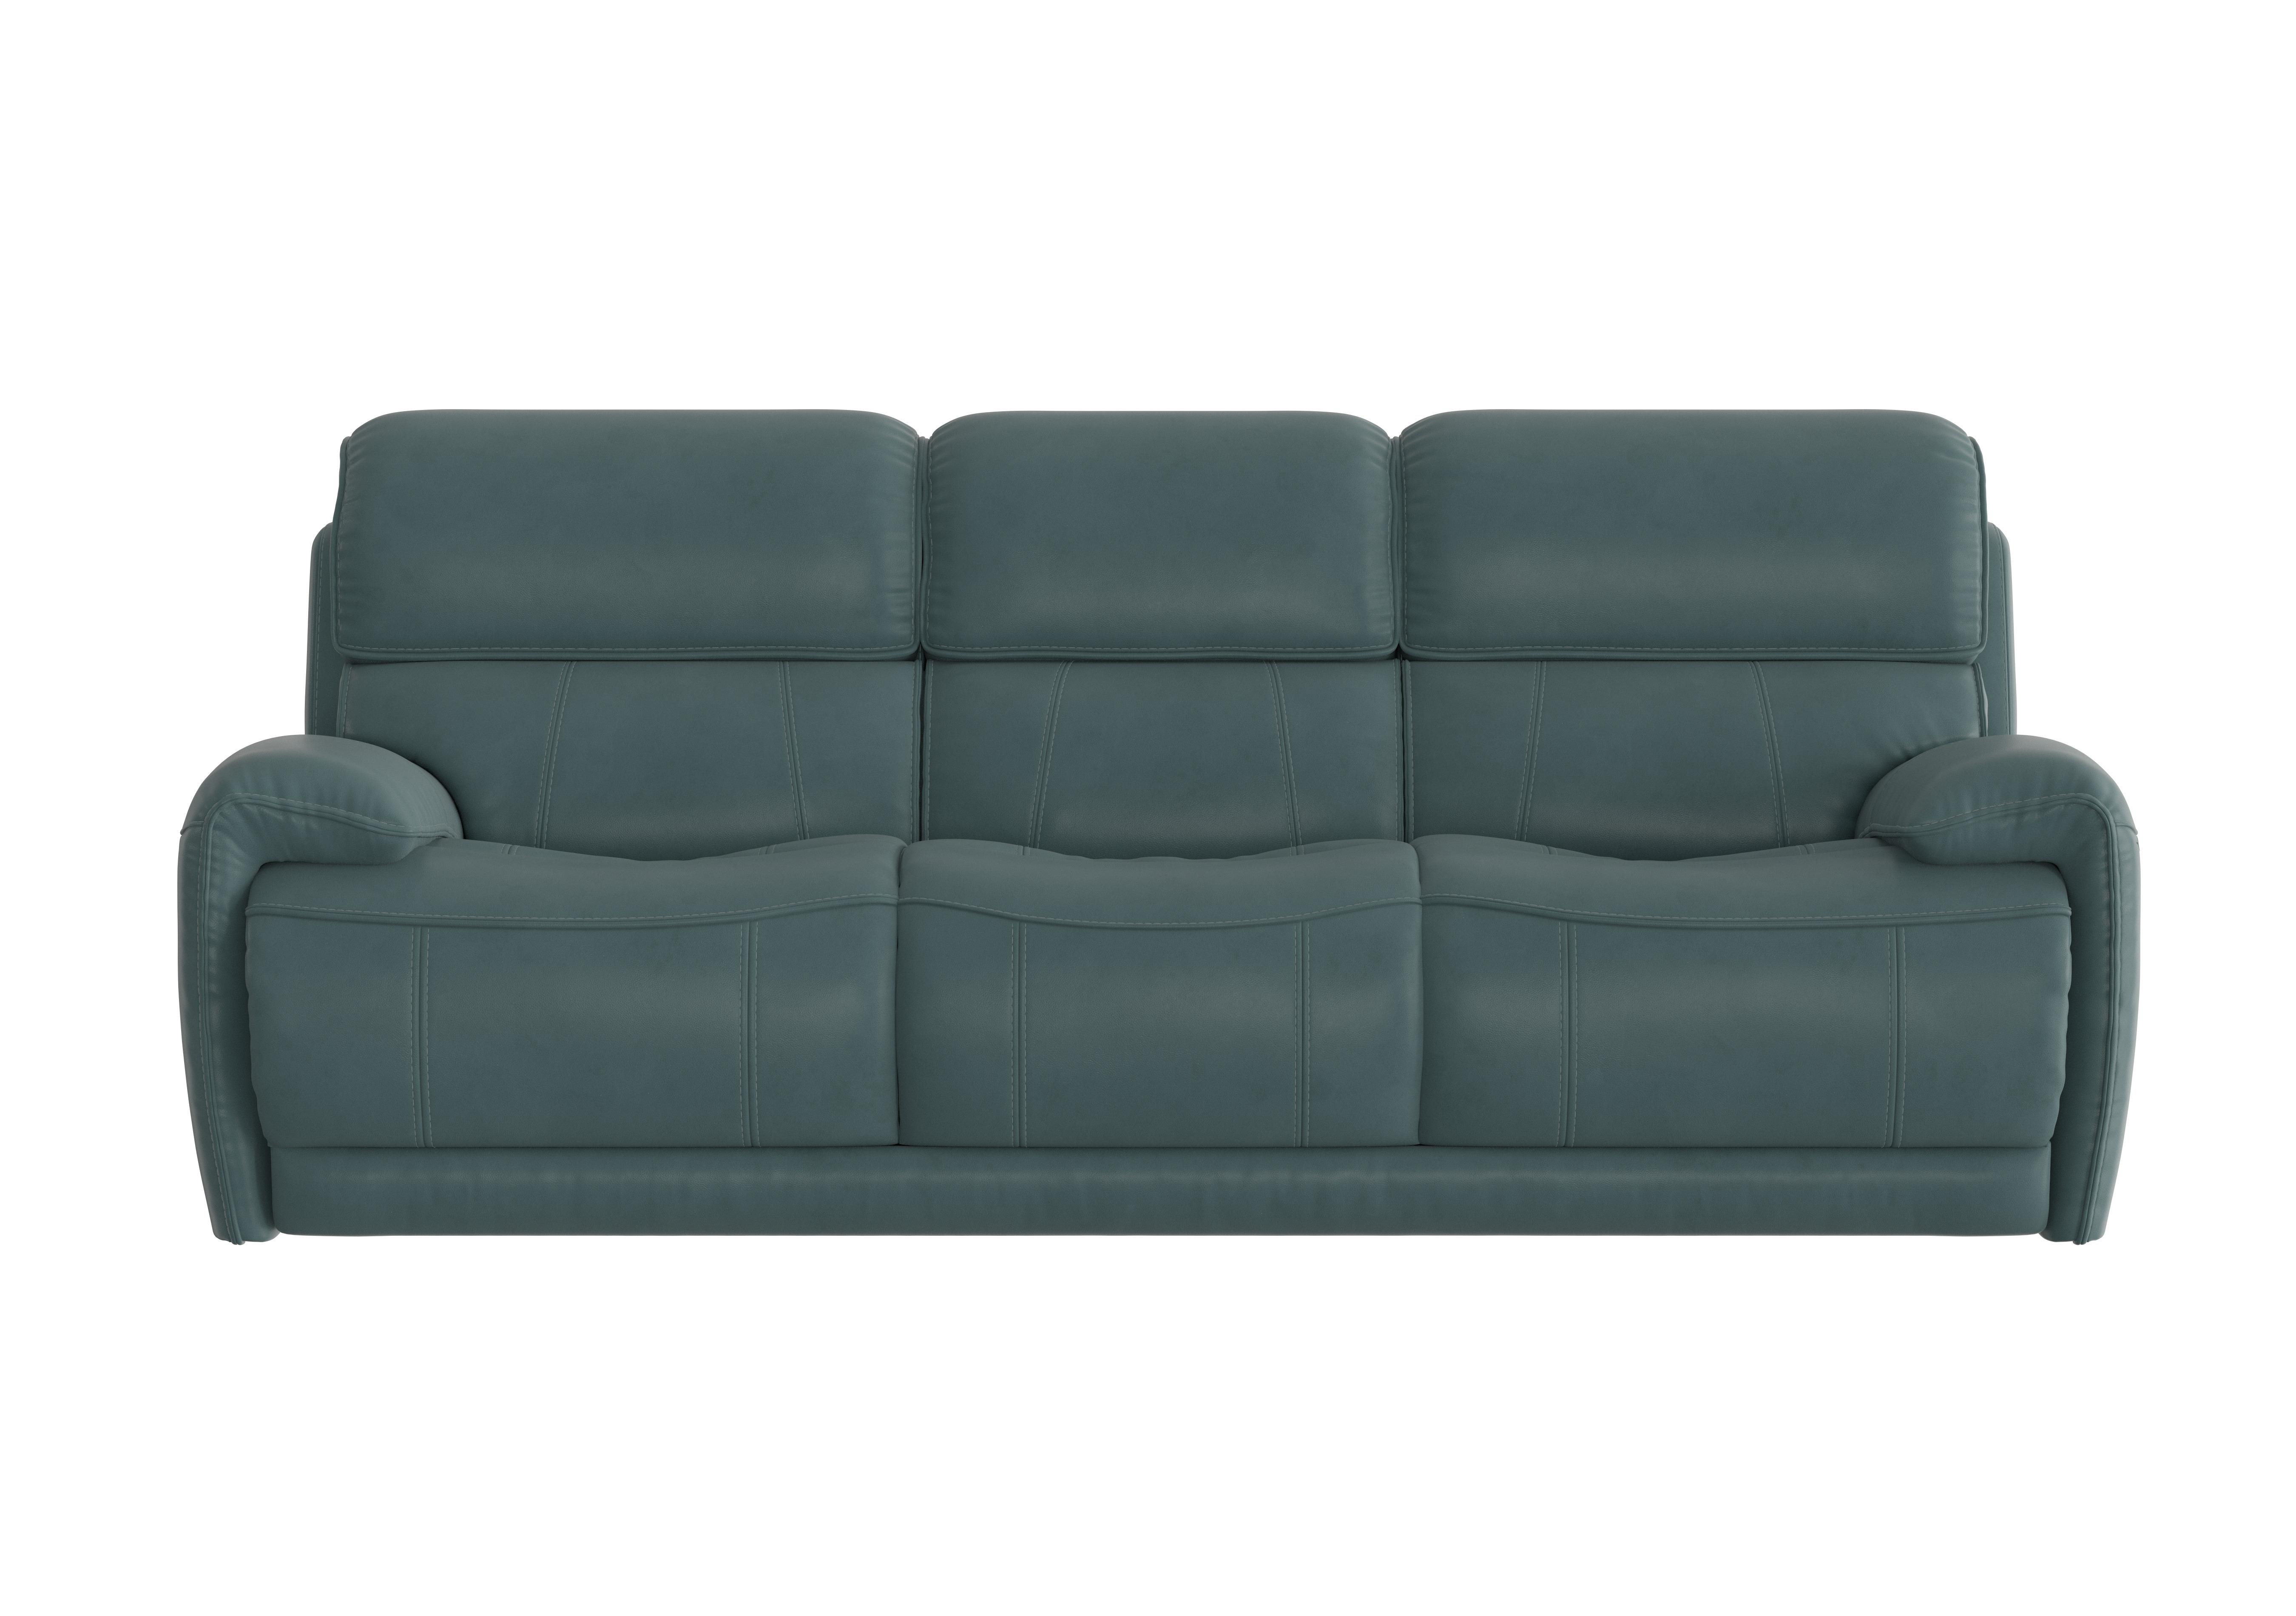 Link 3 Seater Leather Sofa in Bv-301e Lake Green on Furniture Village